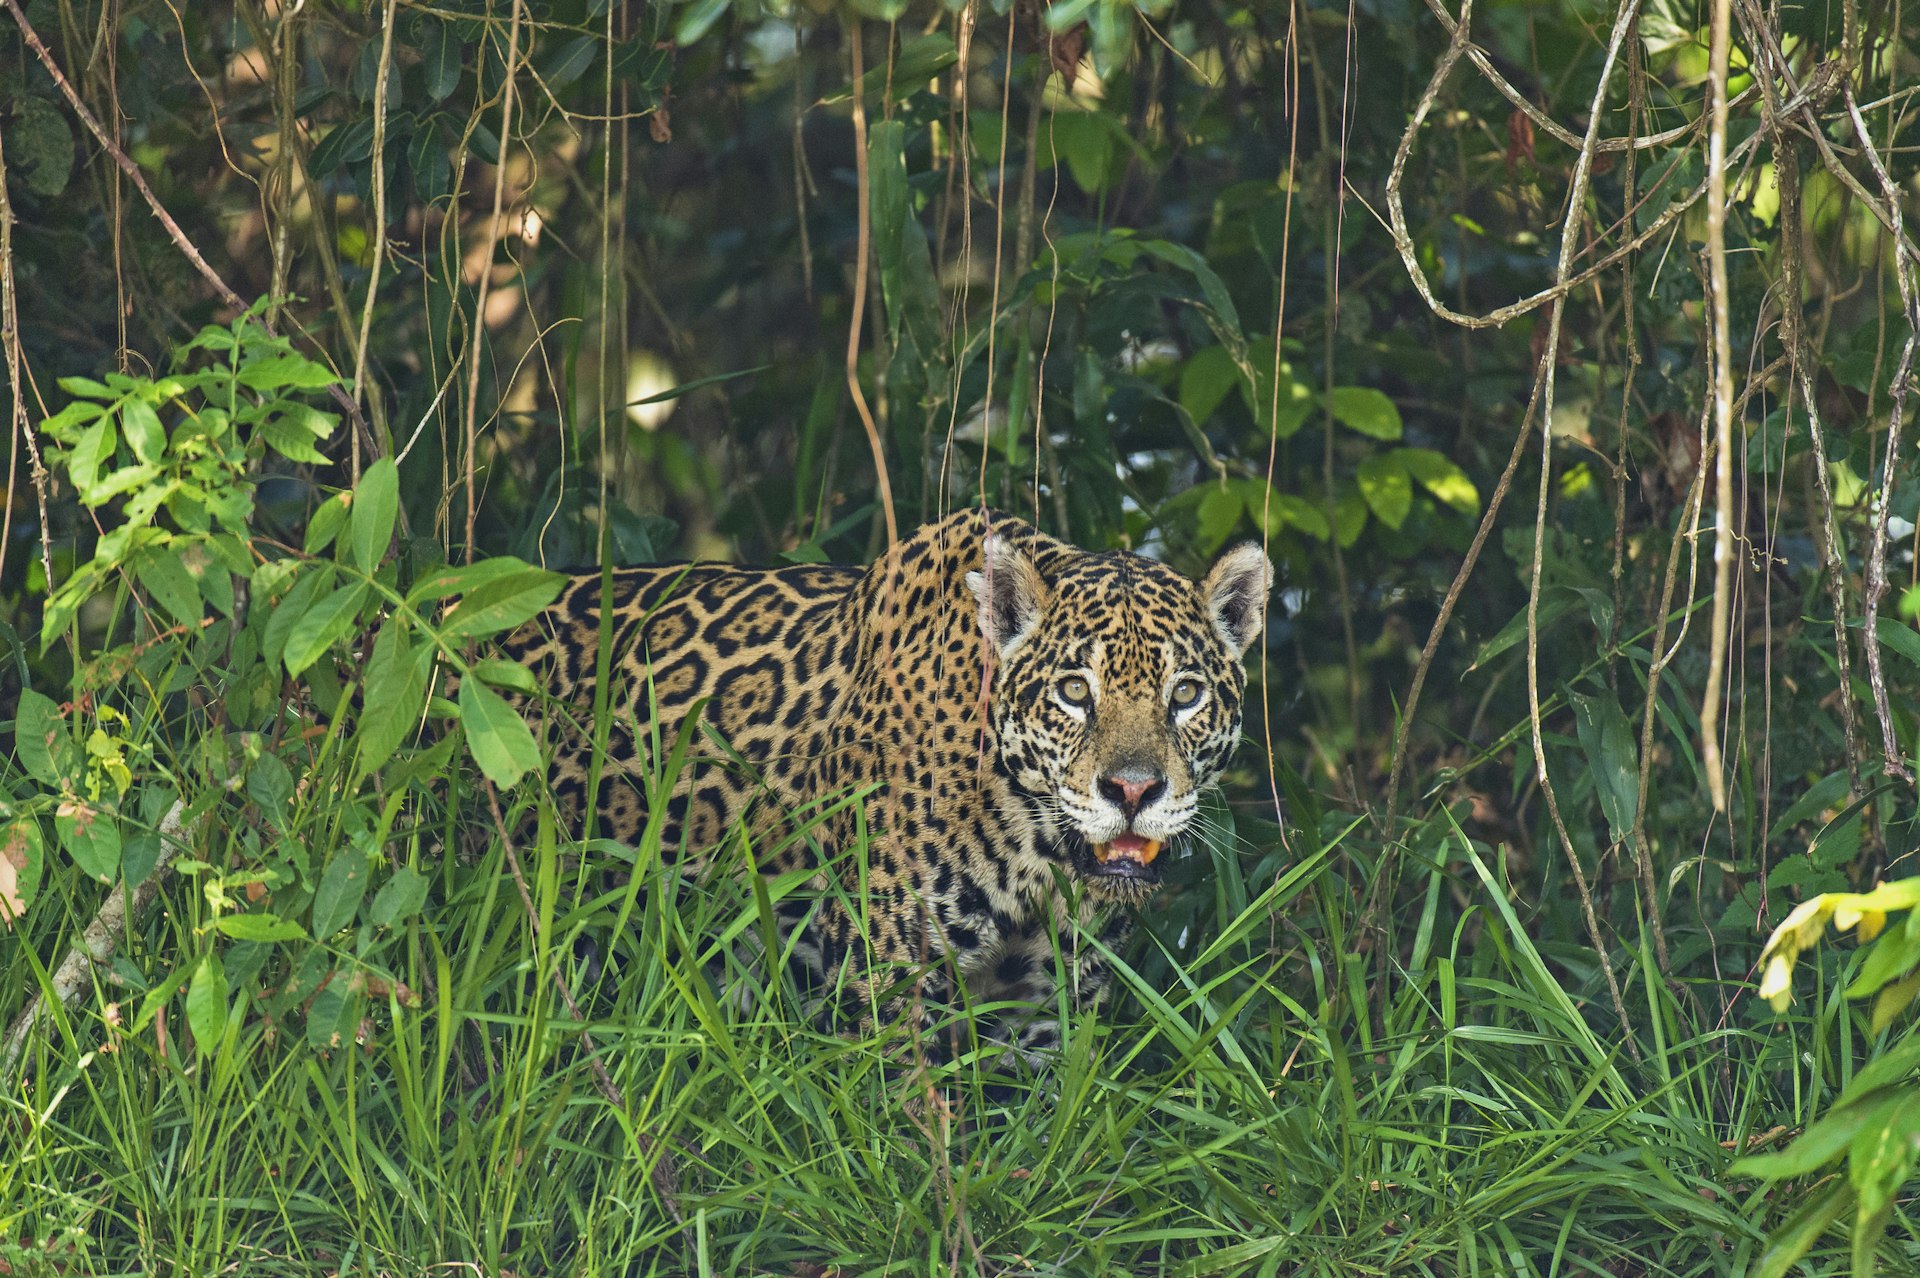 Jaguar sitting in the forest in the Pantanal region of Brazil